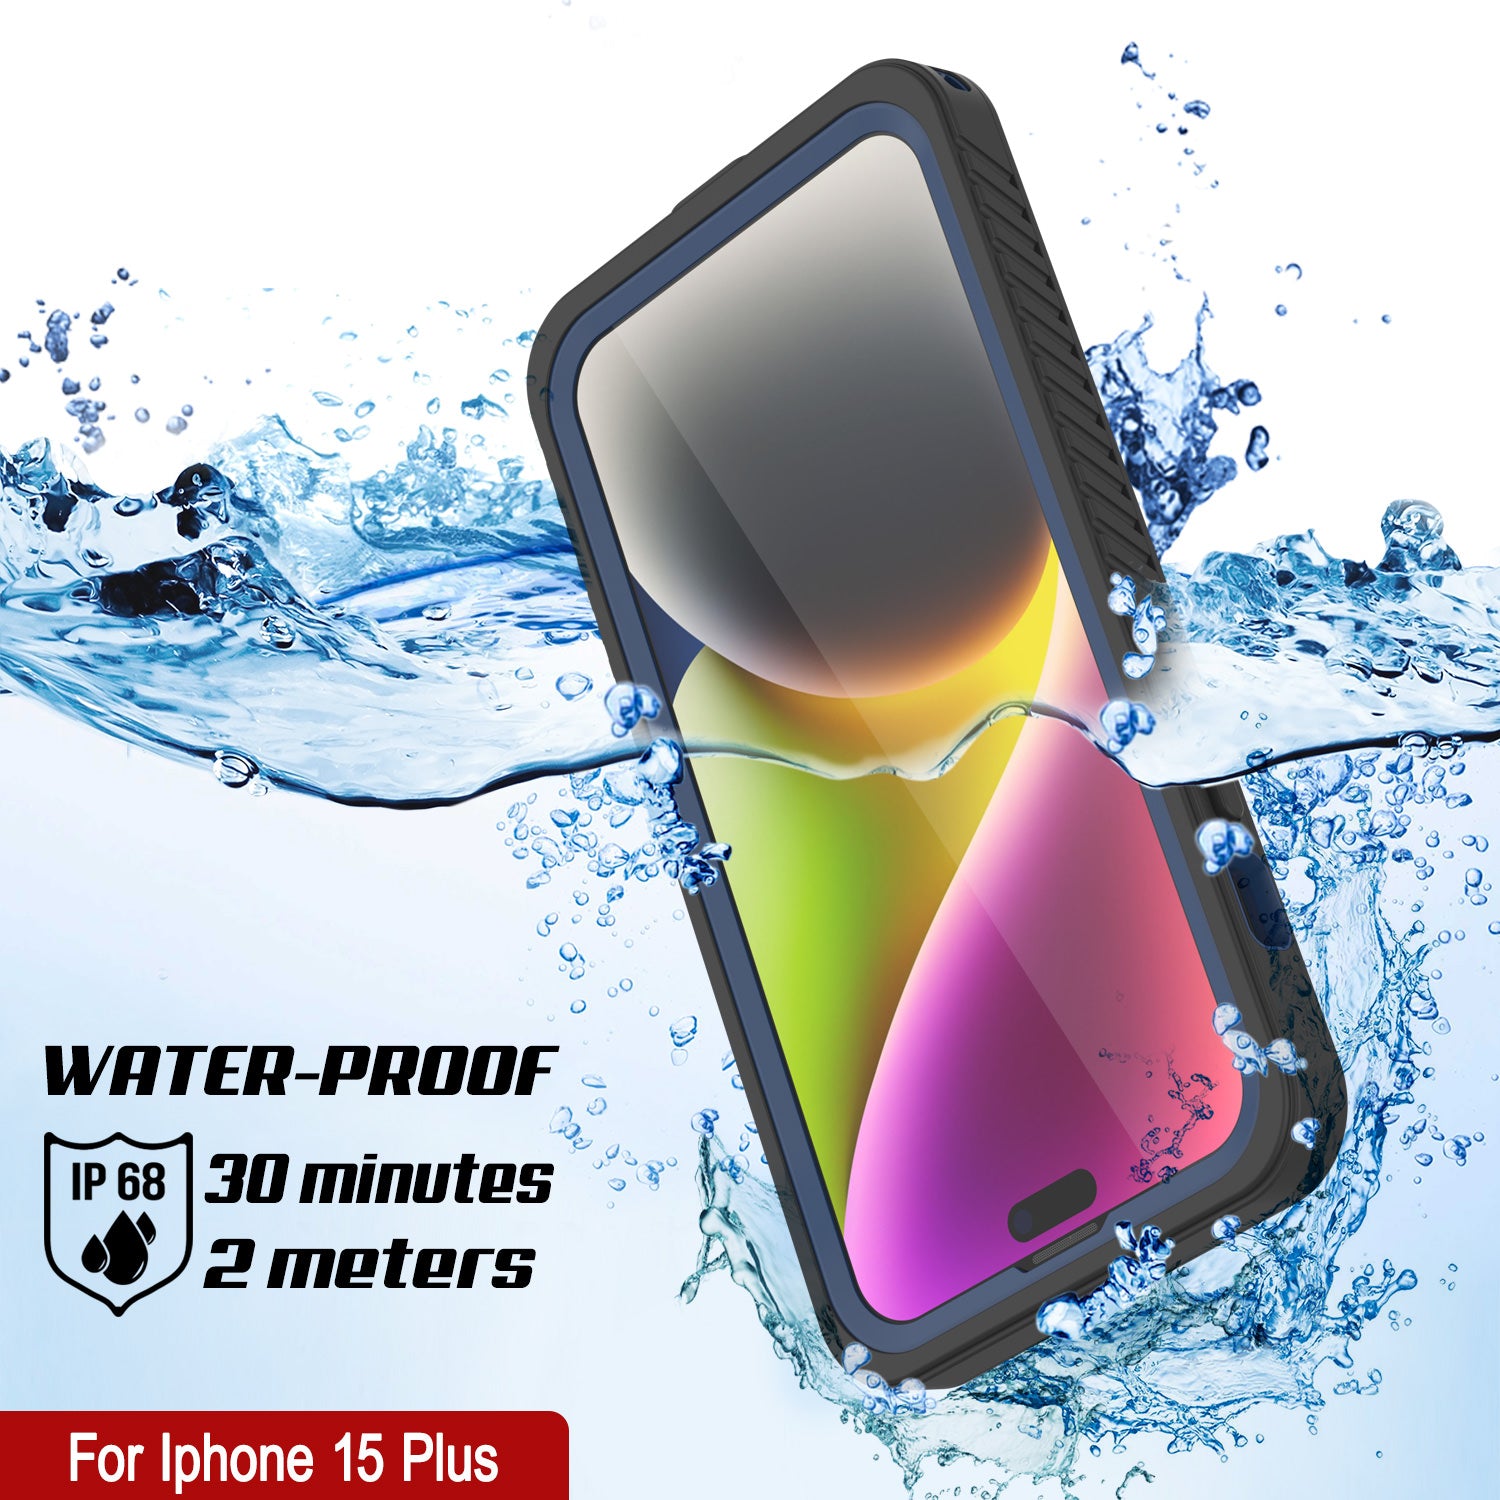 https://www.punkcase.com/cdn/shop/files/iphone-15-plus-waterproof-case-punkcase-extreme-series-slim-fit-ip68-certified-shockproof-snowproof-dirtproof-military-grade-rugged-innovative-design-armor-cover-w-built-in-screen-pro_16b782bf-1fa2-47b8-83e6-552327bf4684.jpg?v=1694542908